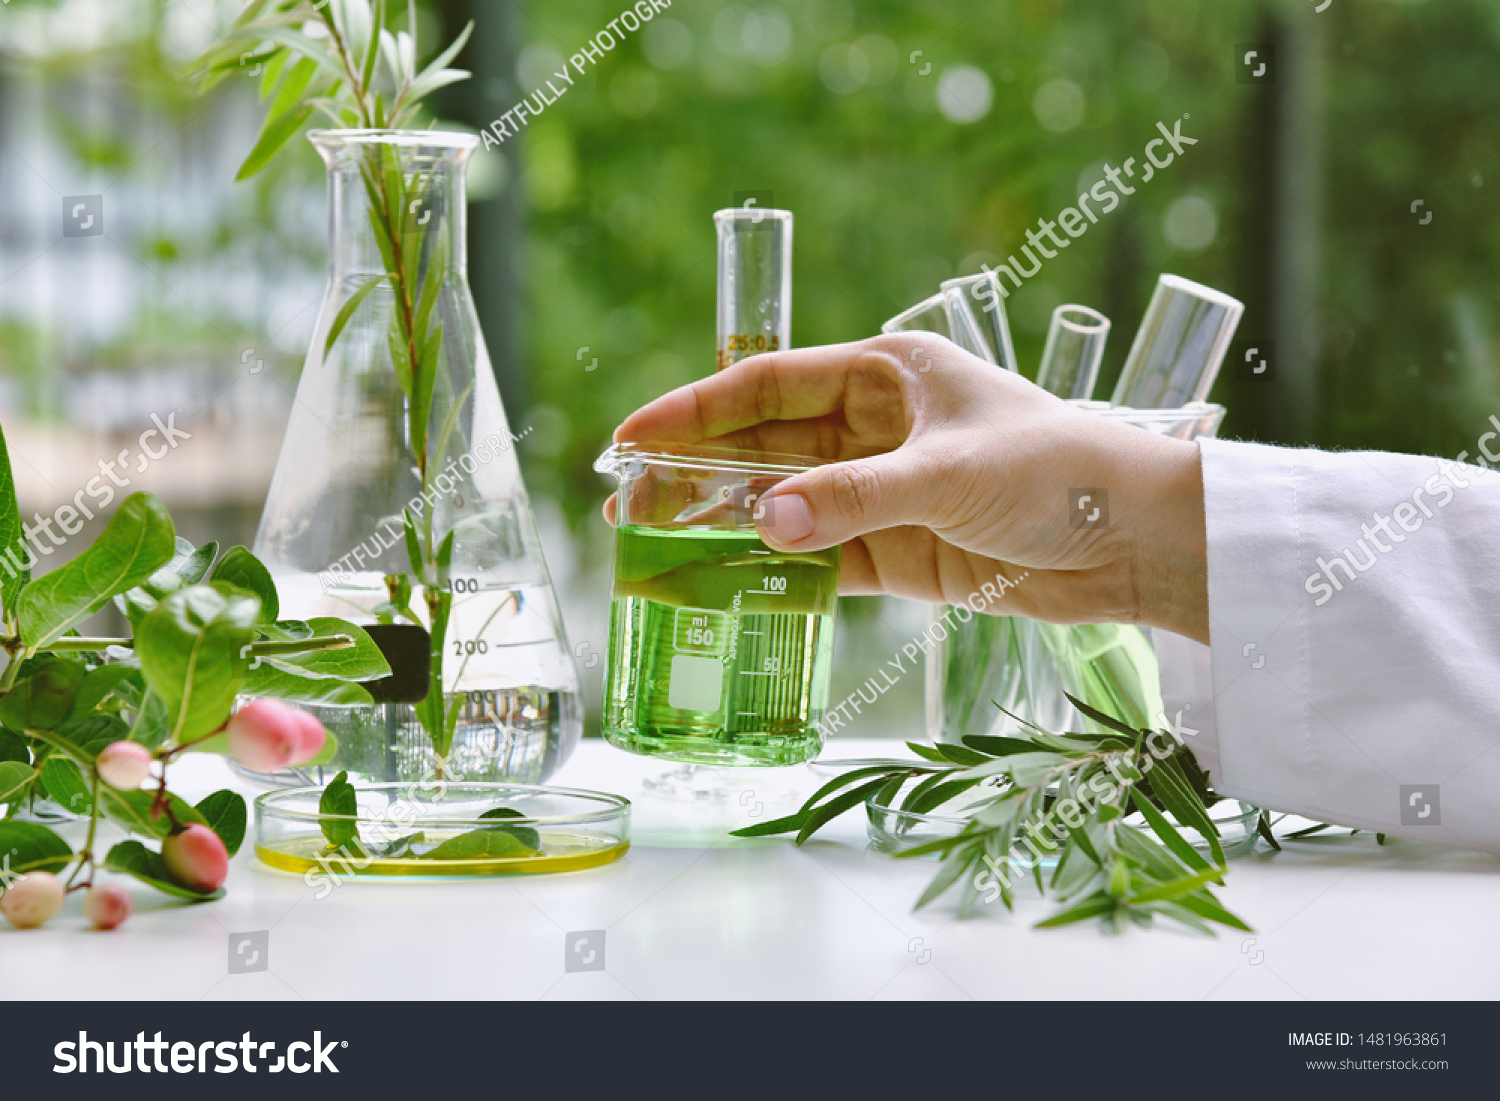 Scientist with natural drug research, Natural organic and scientific extraction in glassware, Alternative green herb medicine, Natural skin care beauty products, Laboratory and development concept. #1481963861